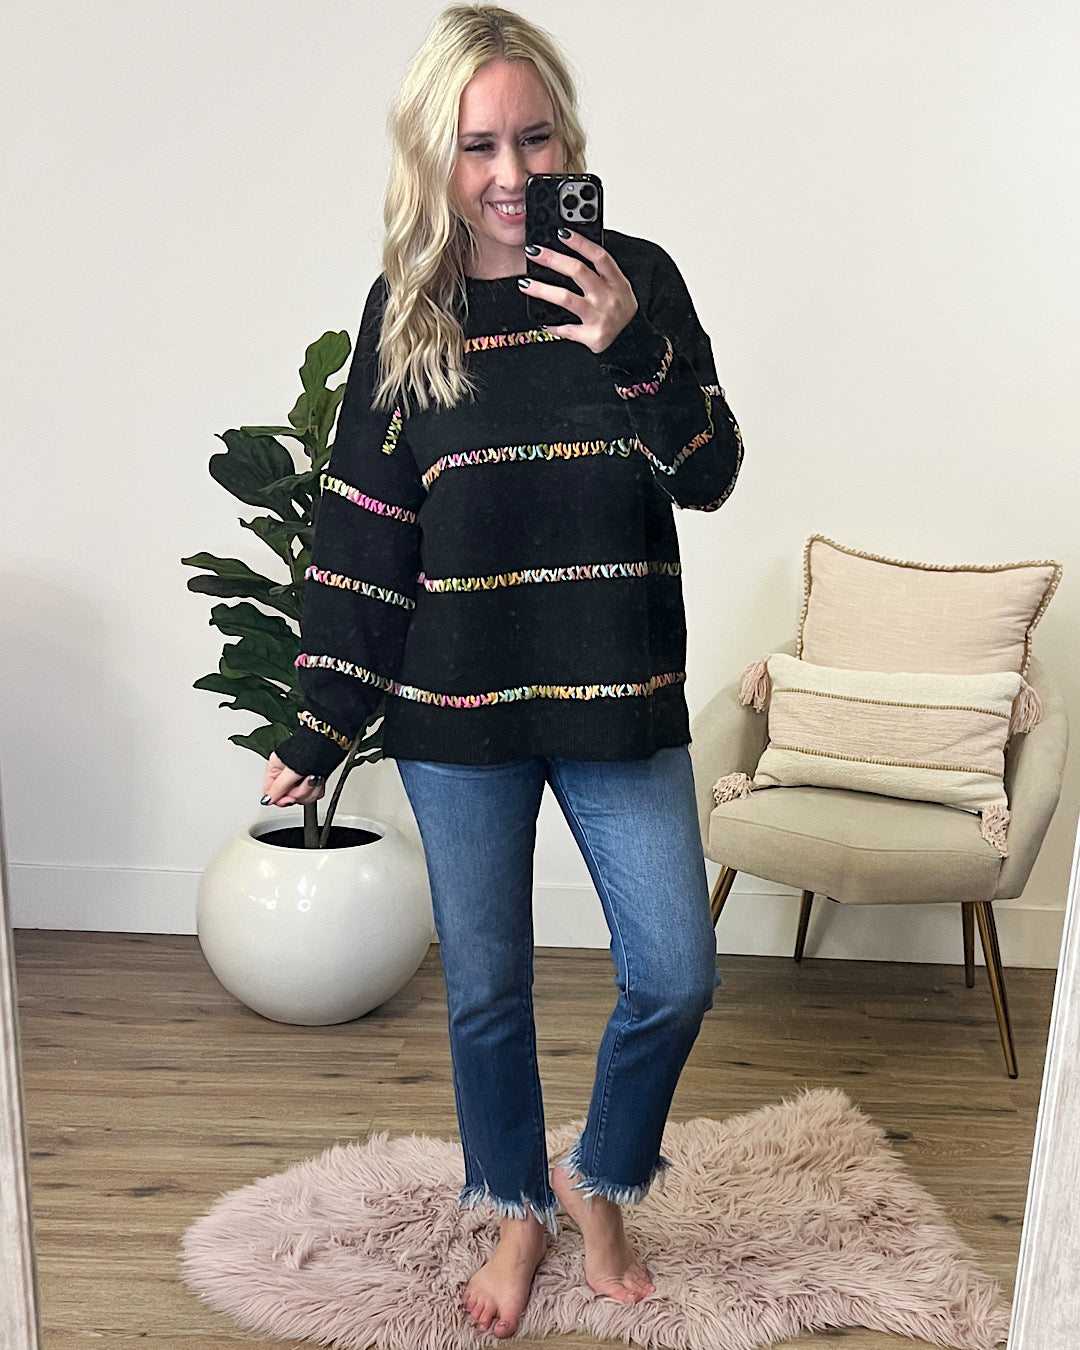 NEW! Dodged a Bullet Rainbow Stitch Sweater - Black  Staccato   